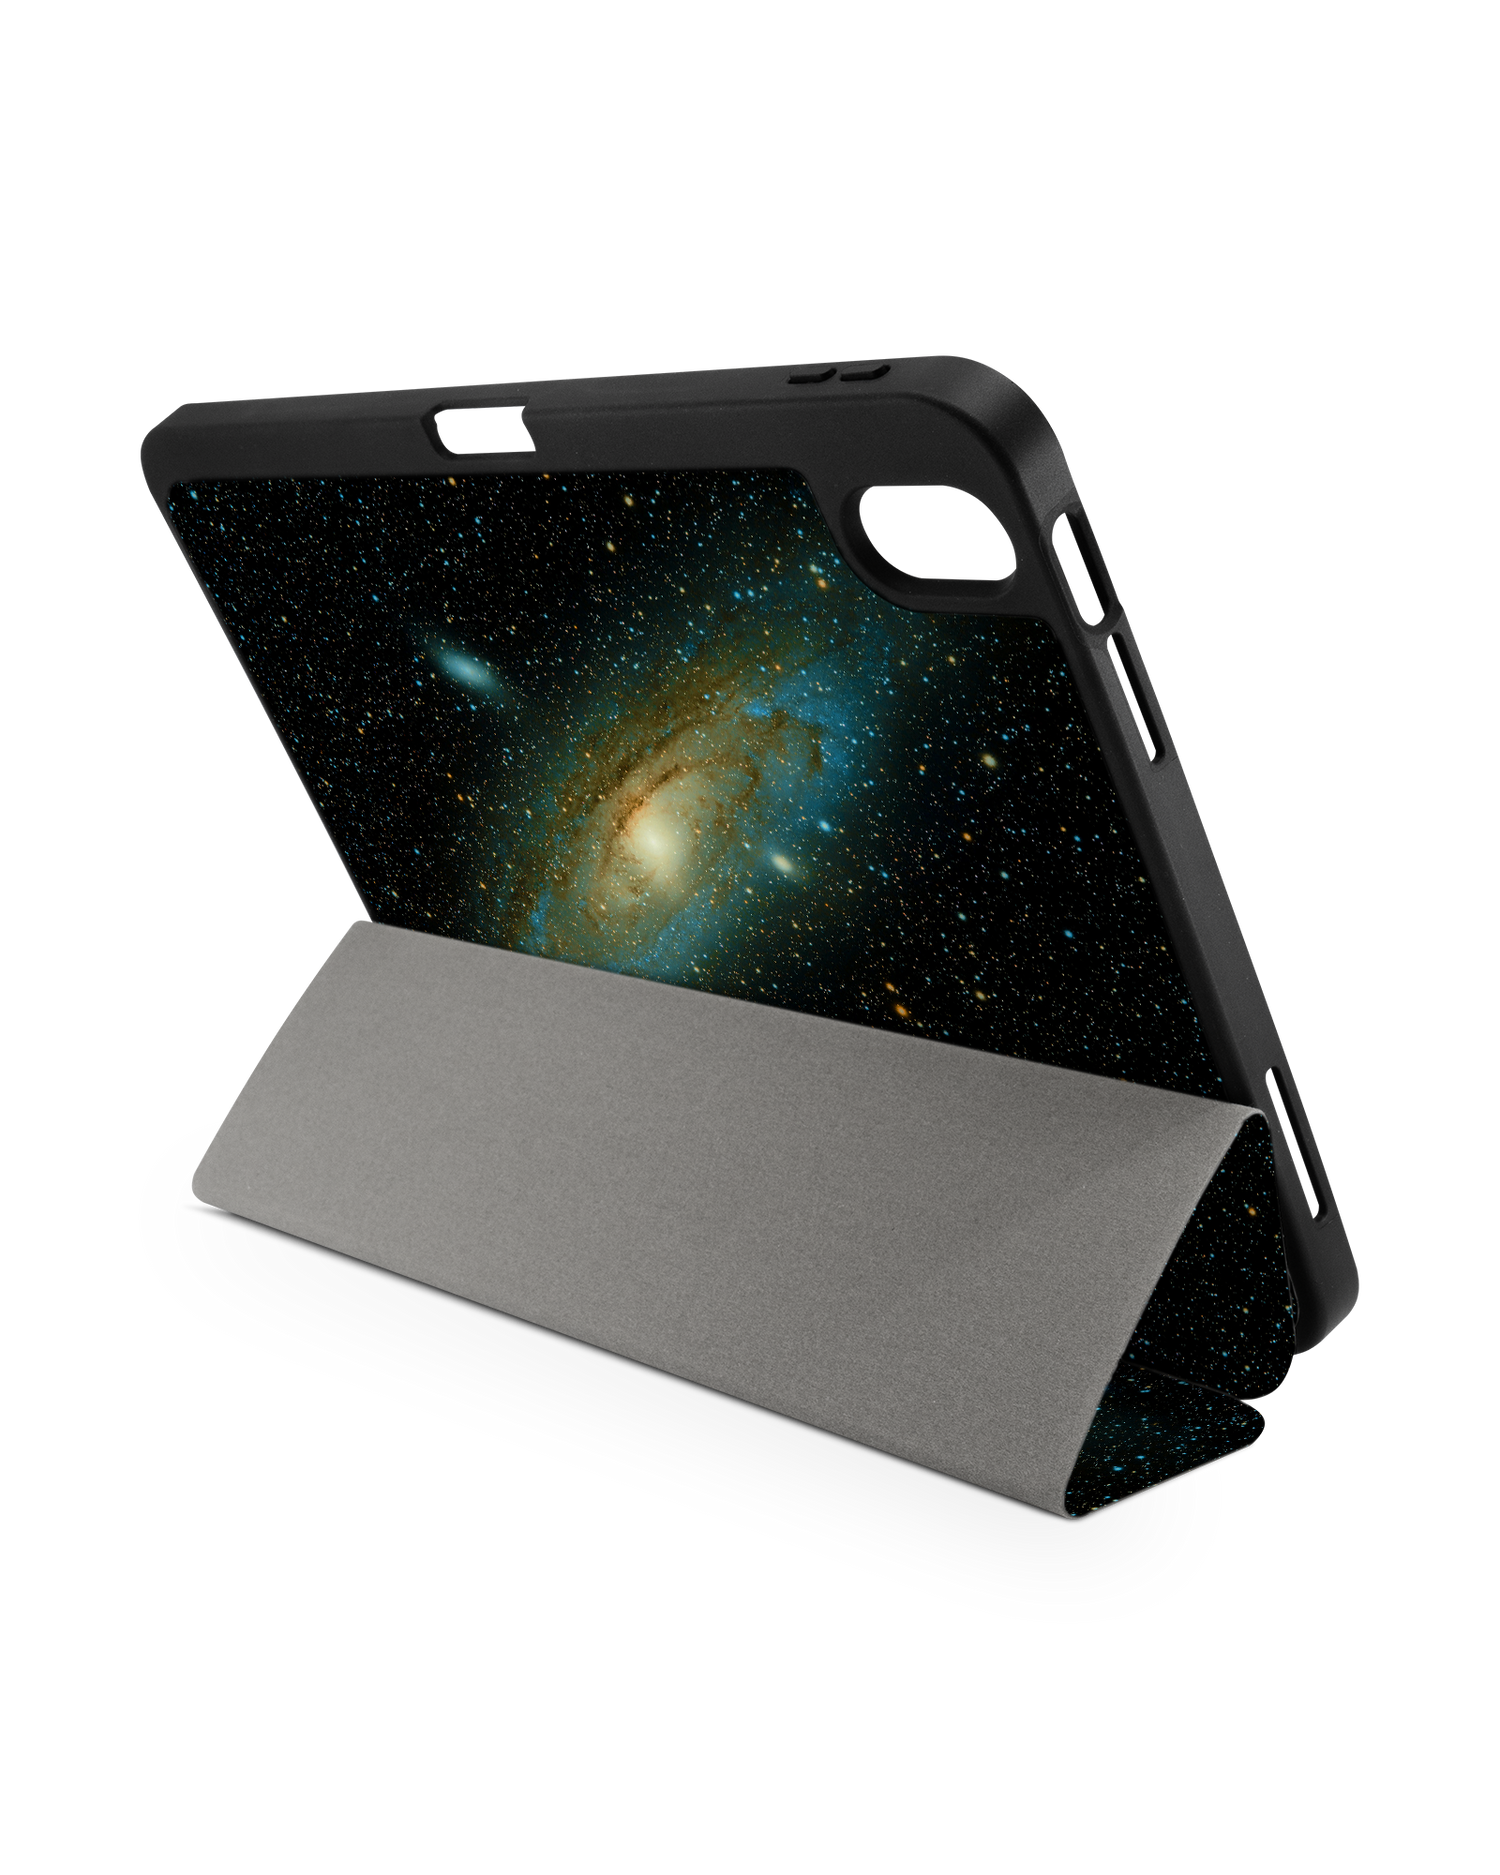 Outer Space iPad Case with Pencil Holder for Apple iPad (10th Generation): Set up in landscape format (back view)